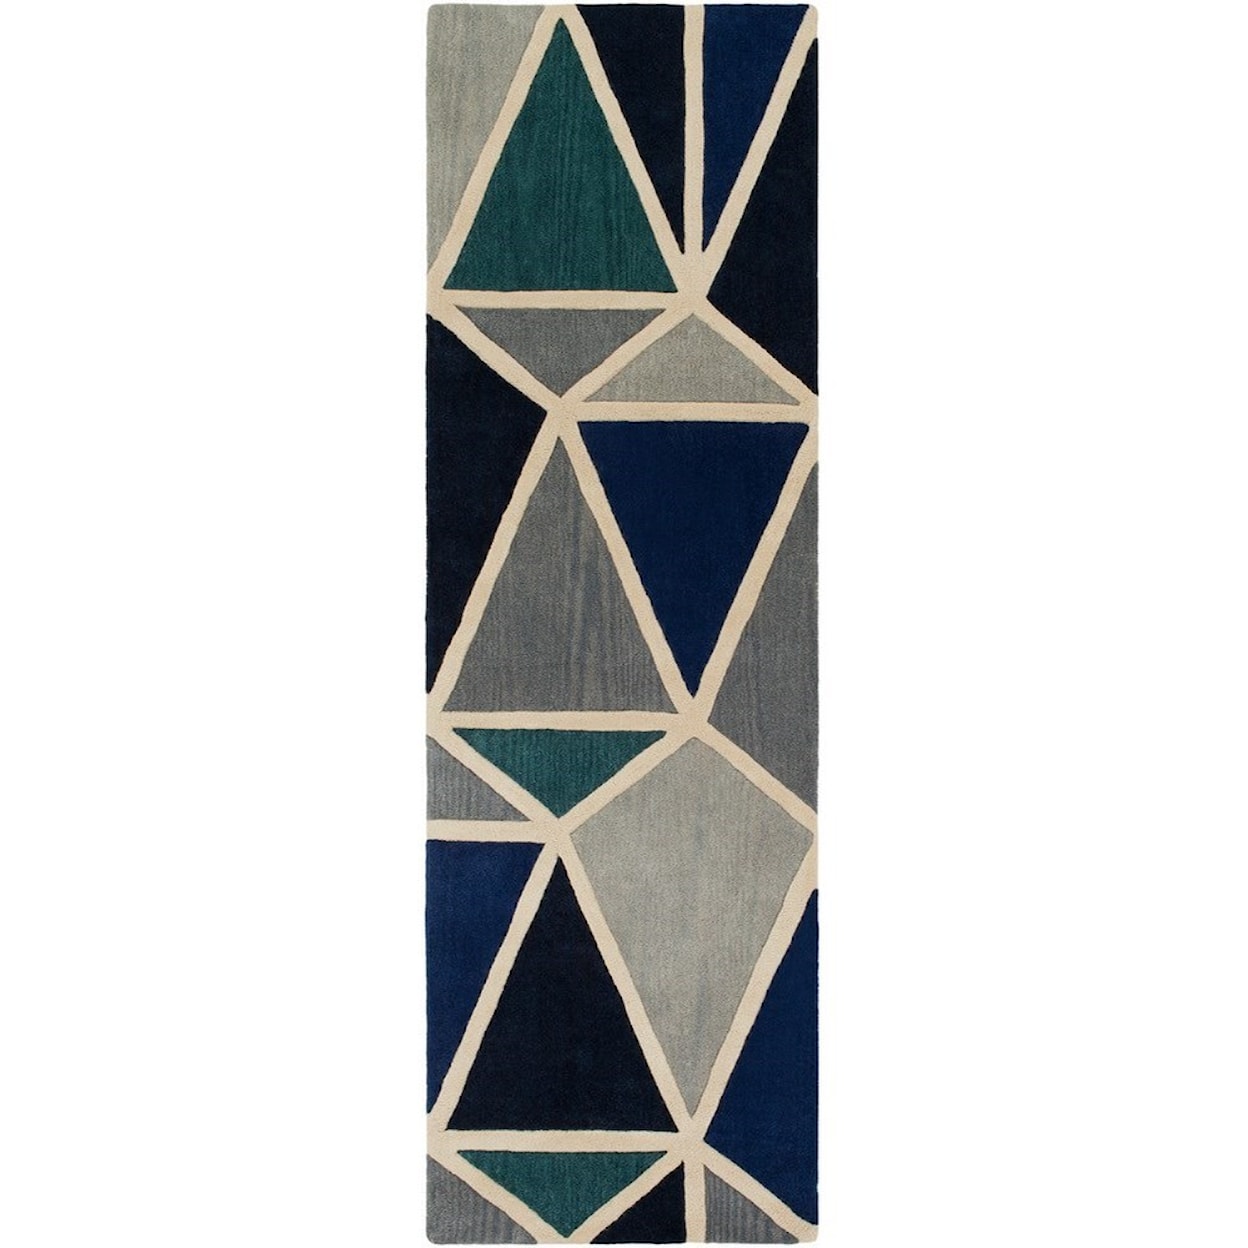 Ruby-Gordon Accents Oasis 2'6" x 8' Runner Rug